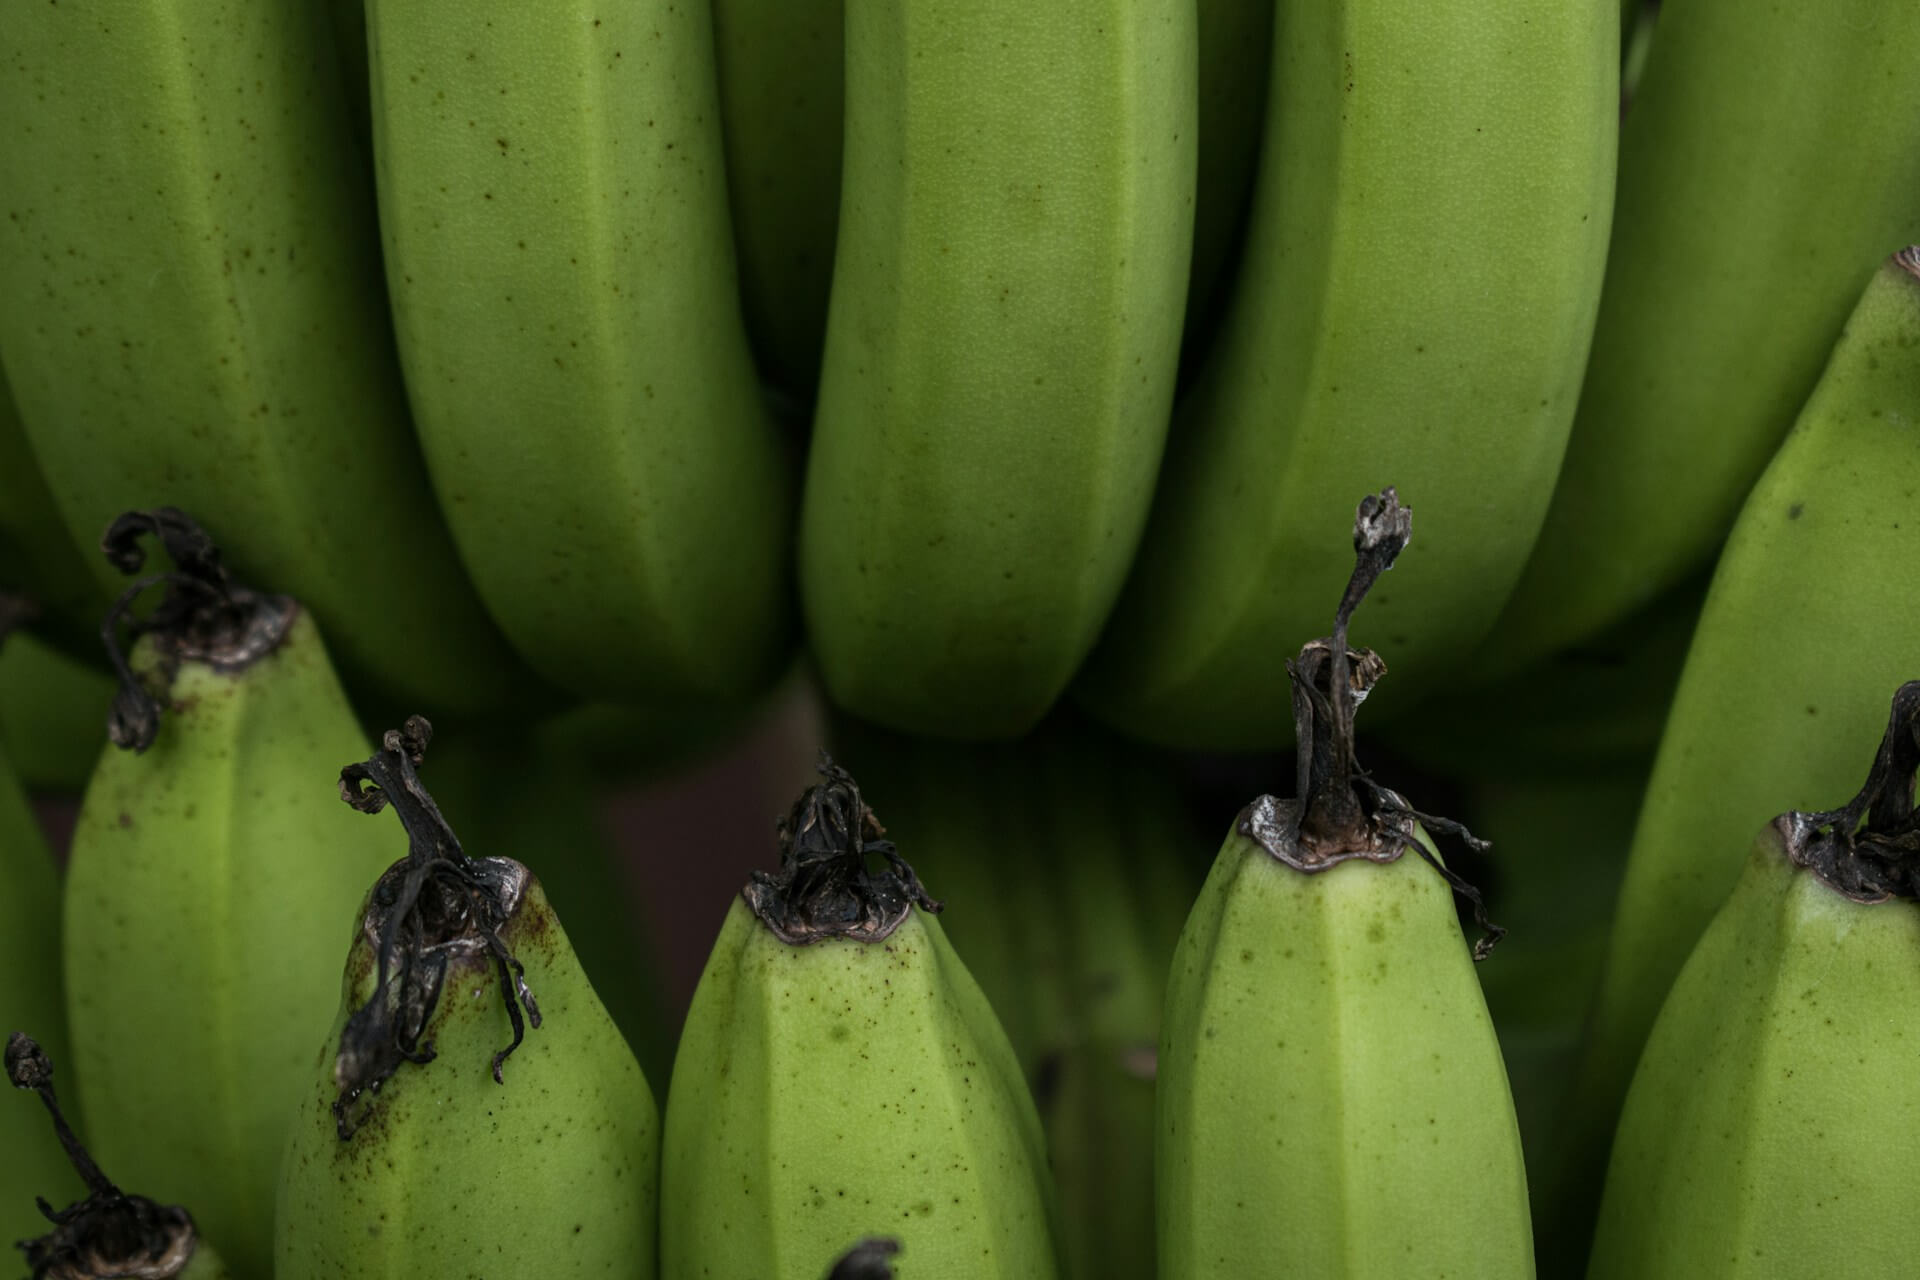 Emerging Markets for Banana Production and Distribution